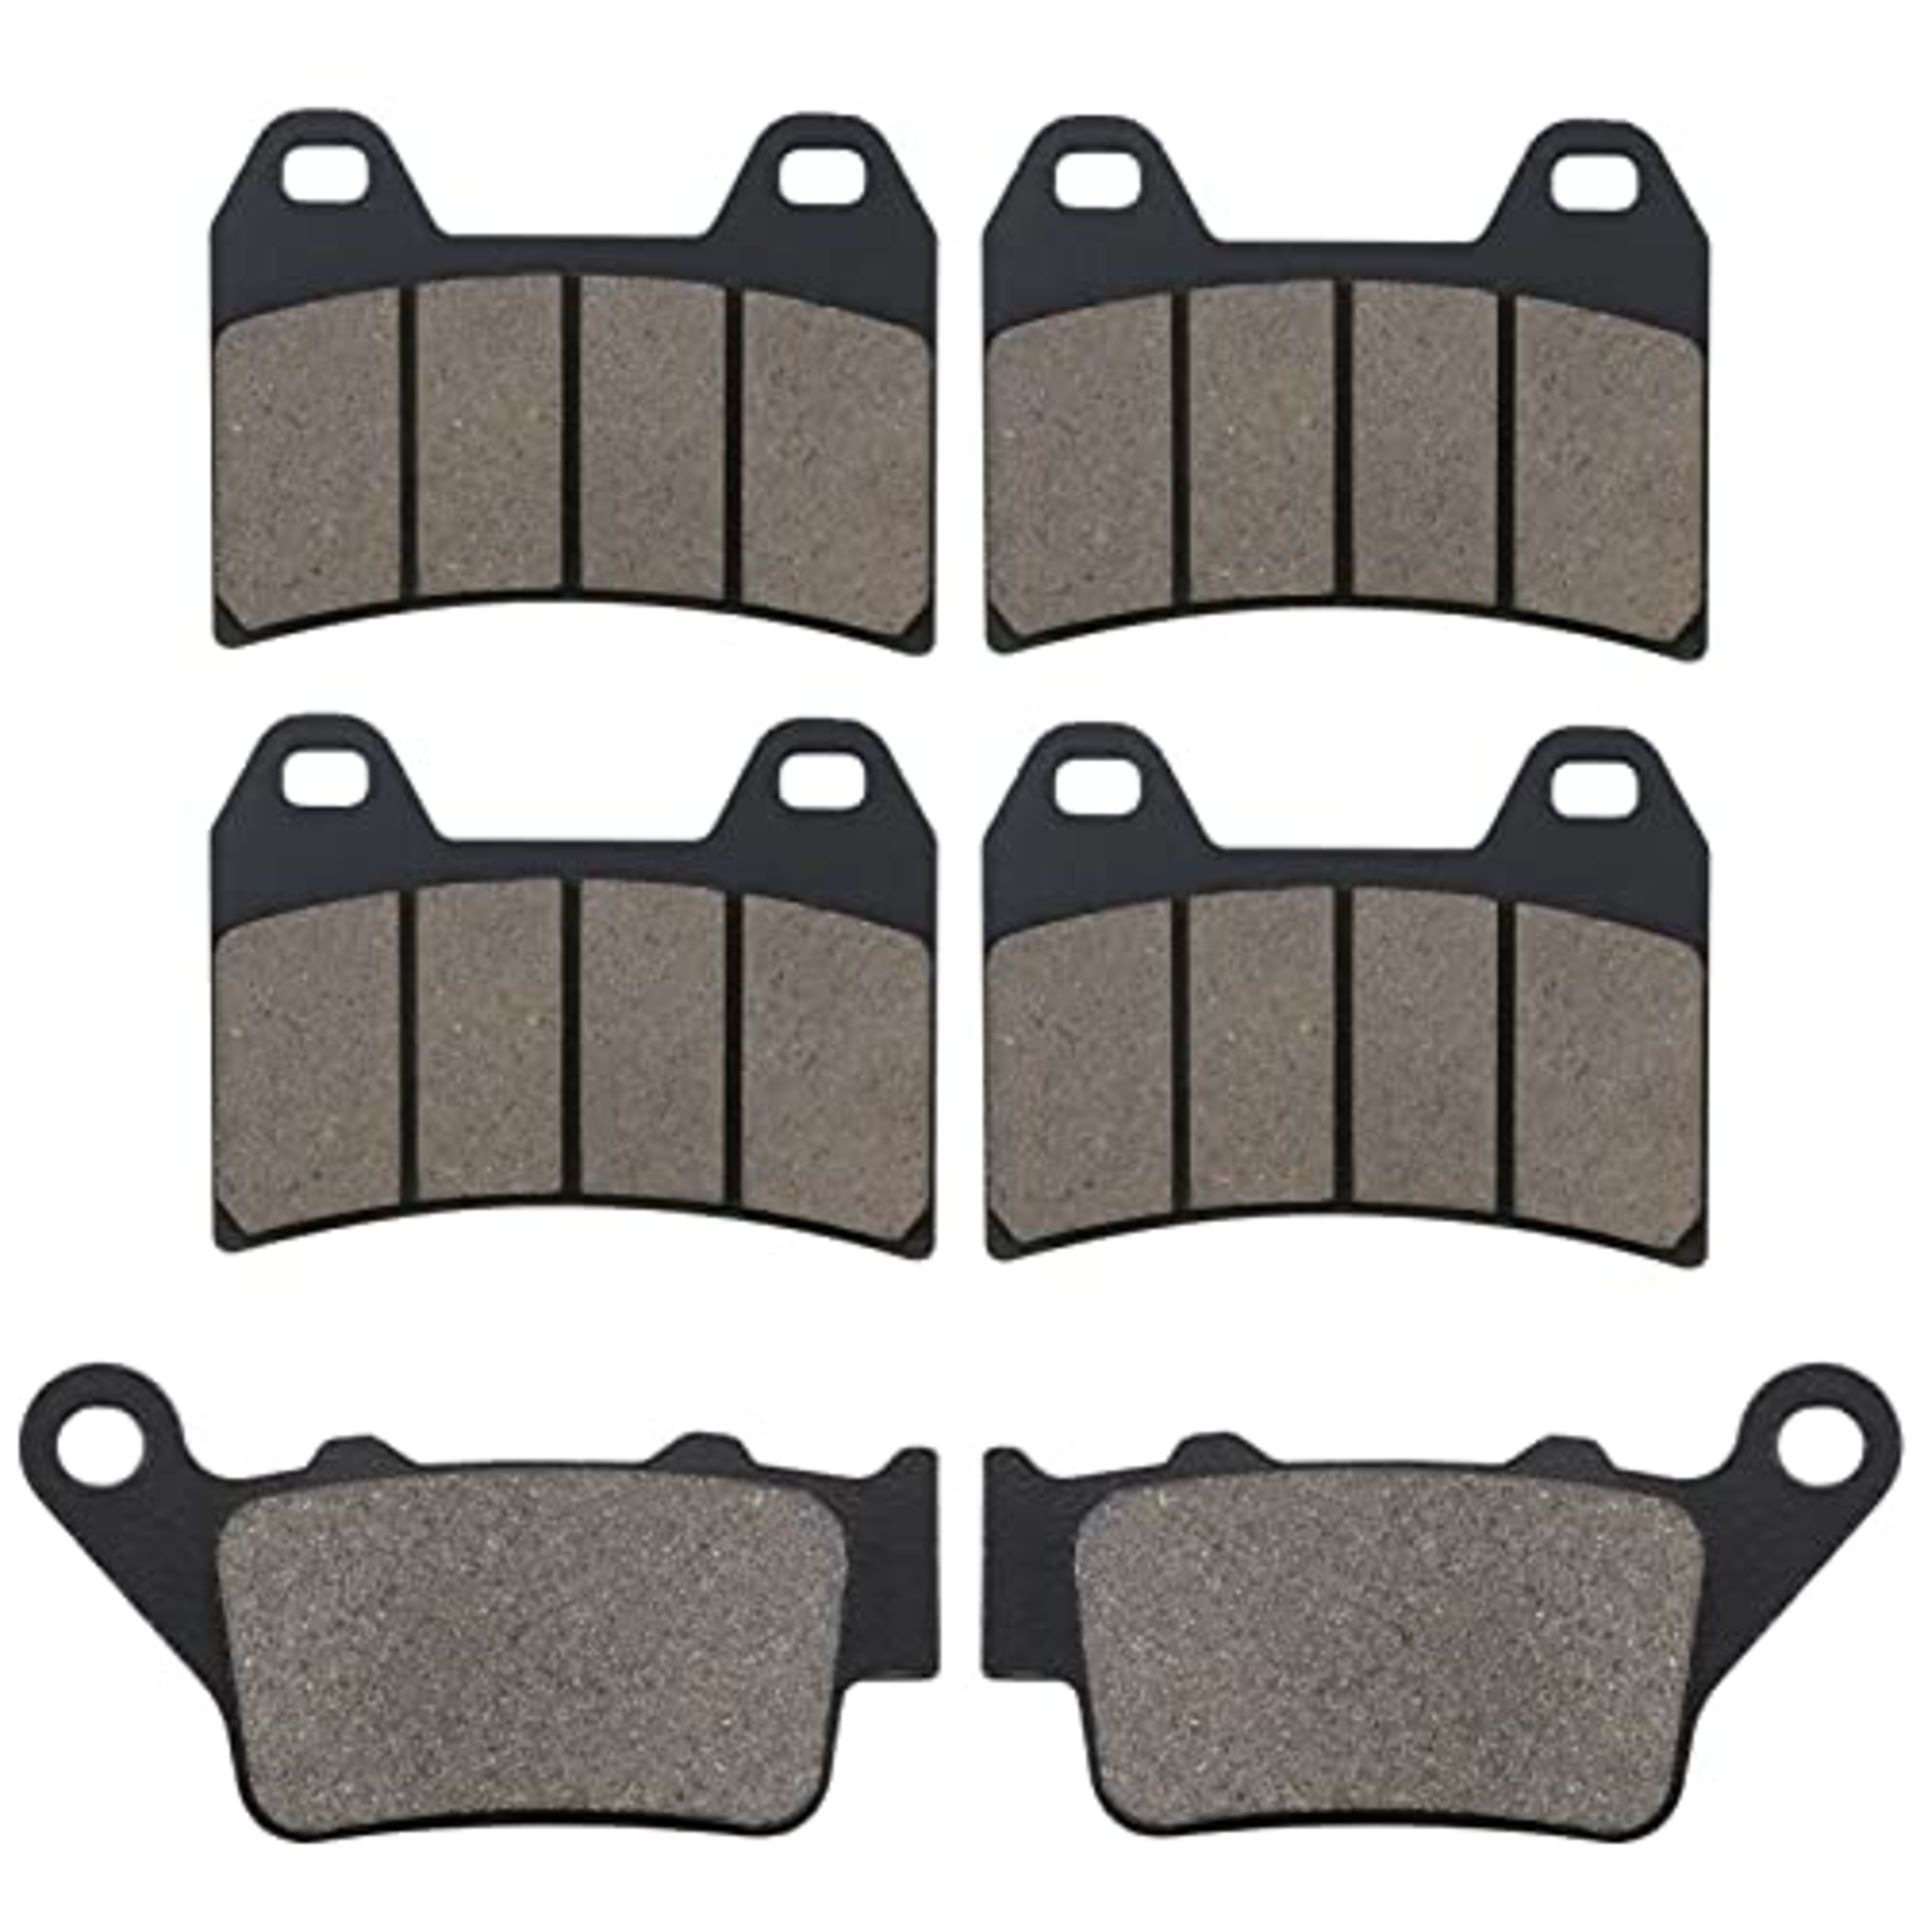 Cnornus Front and rear brake pads suitable for G 650 2007-2009 / F800 R F800R 2009-201